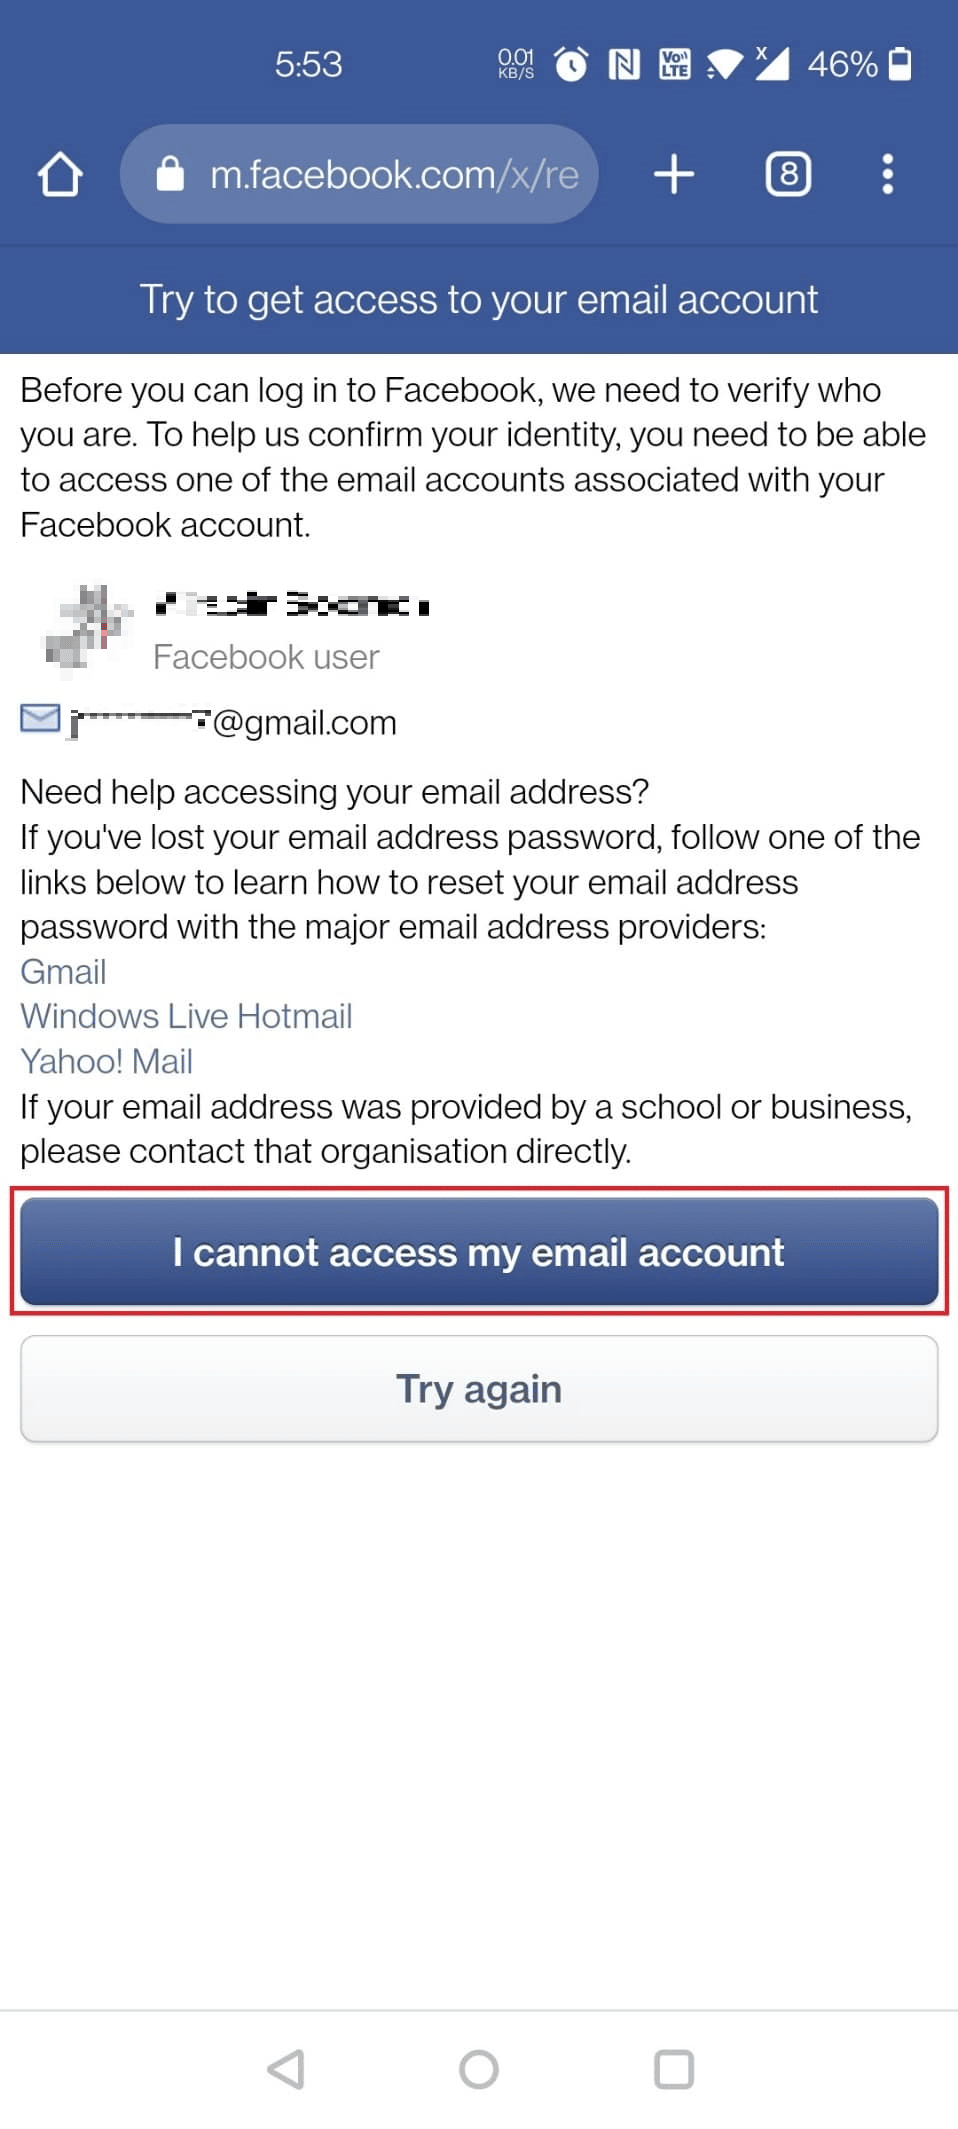 Tap on the I cannot access my email account option